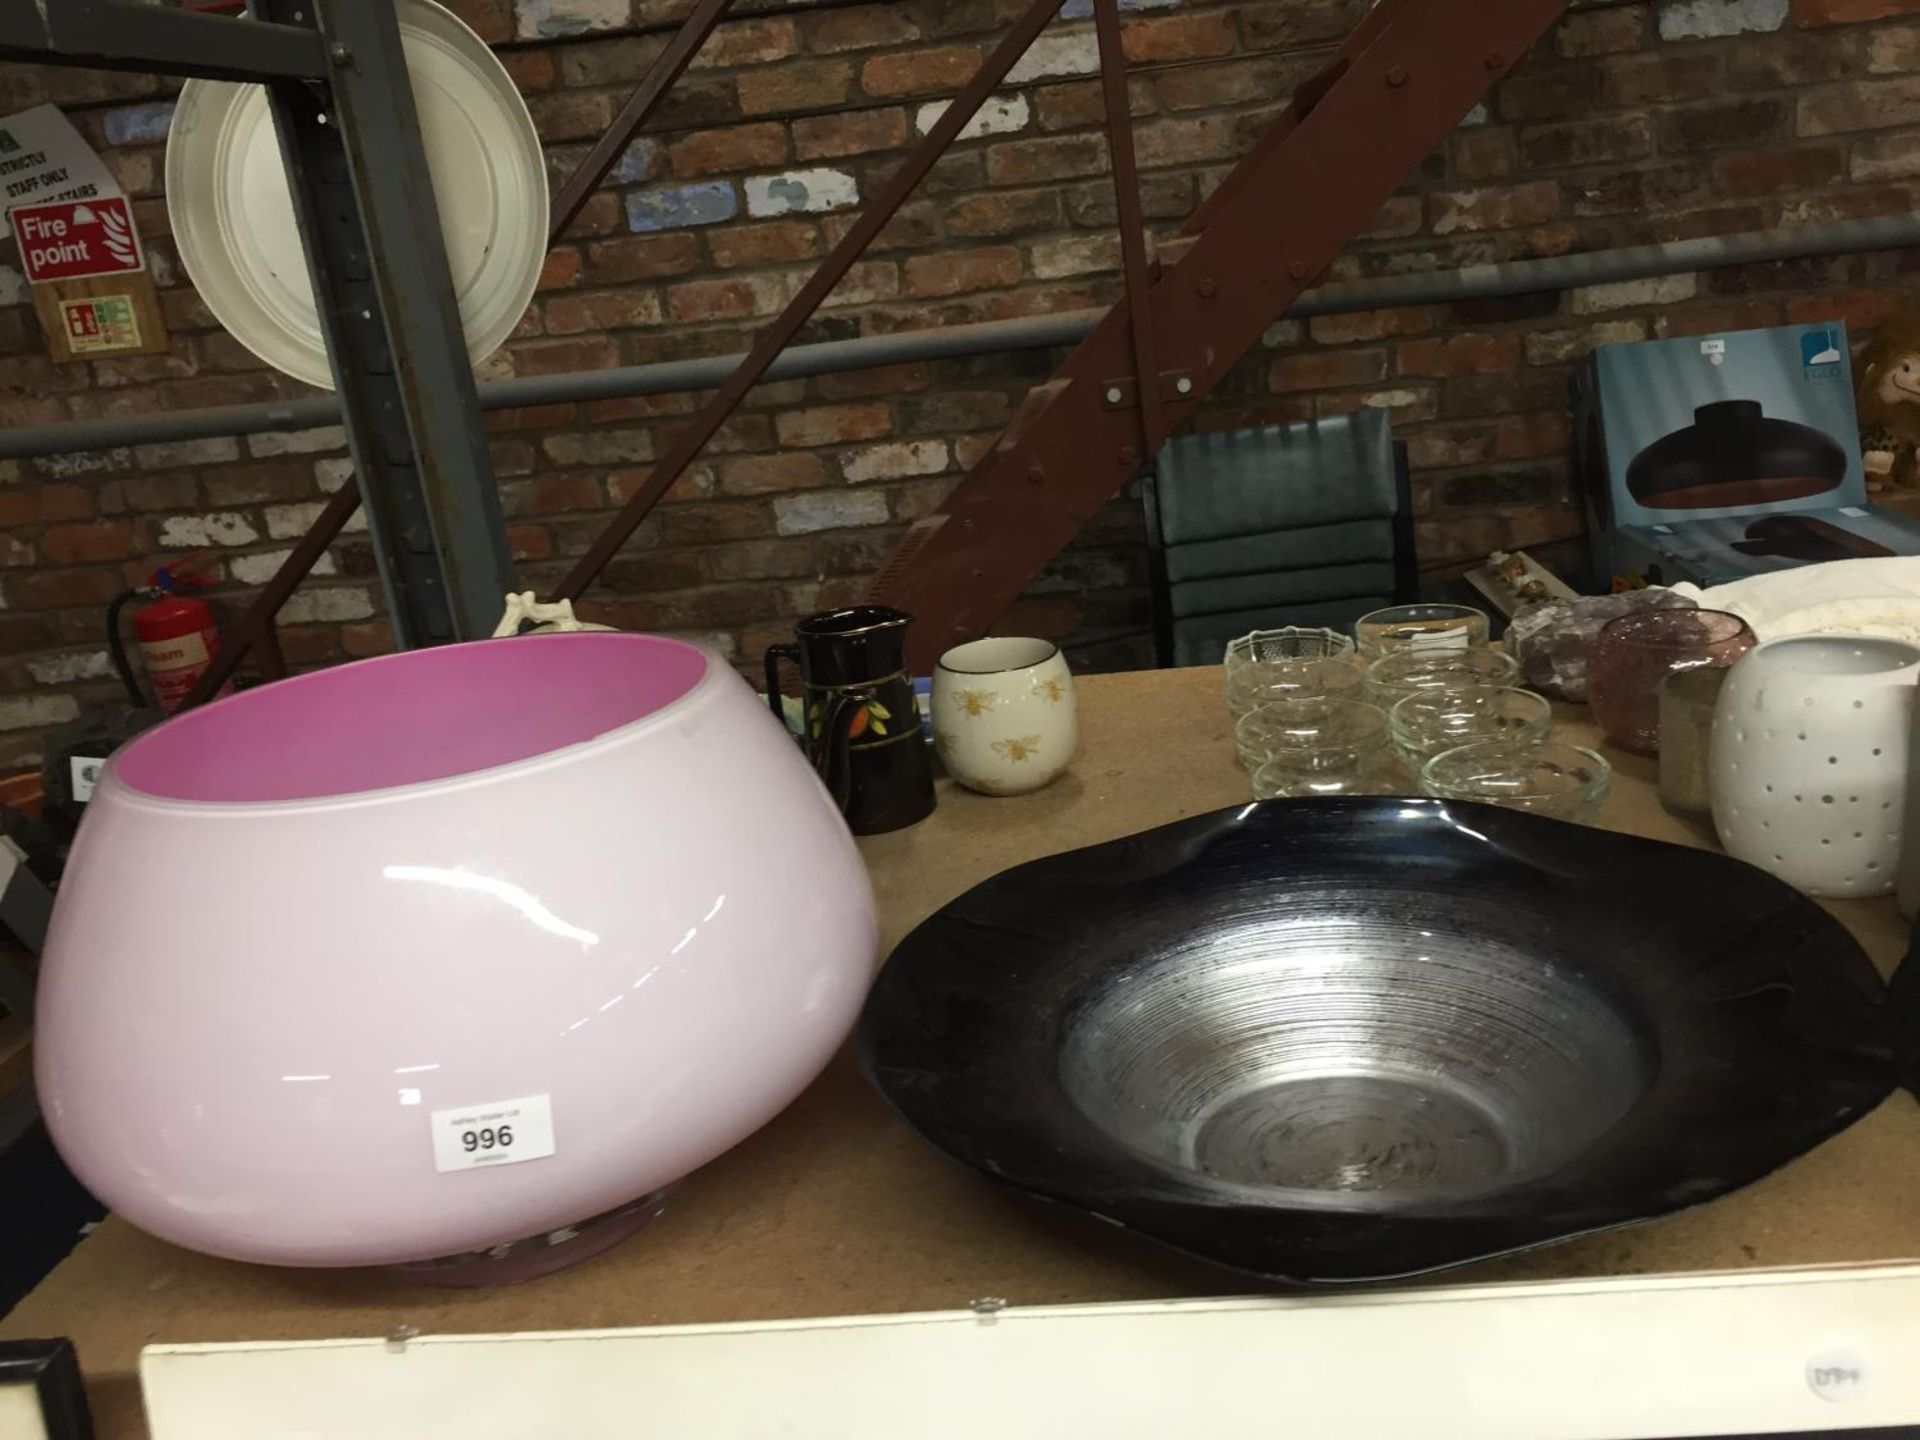 A LARGE PINK GLASS BOWL PLUS A LARGE BLACK AND SILVER BOWL